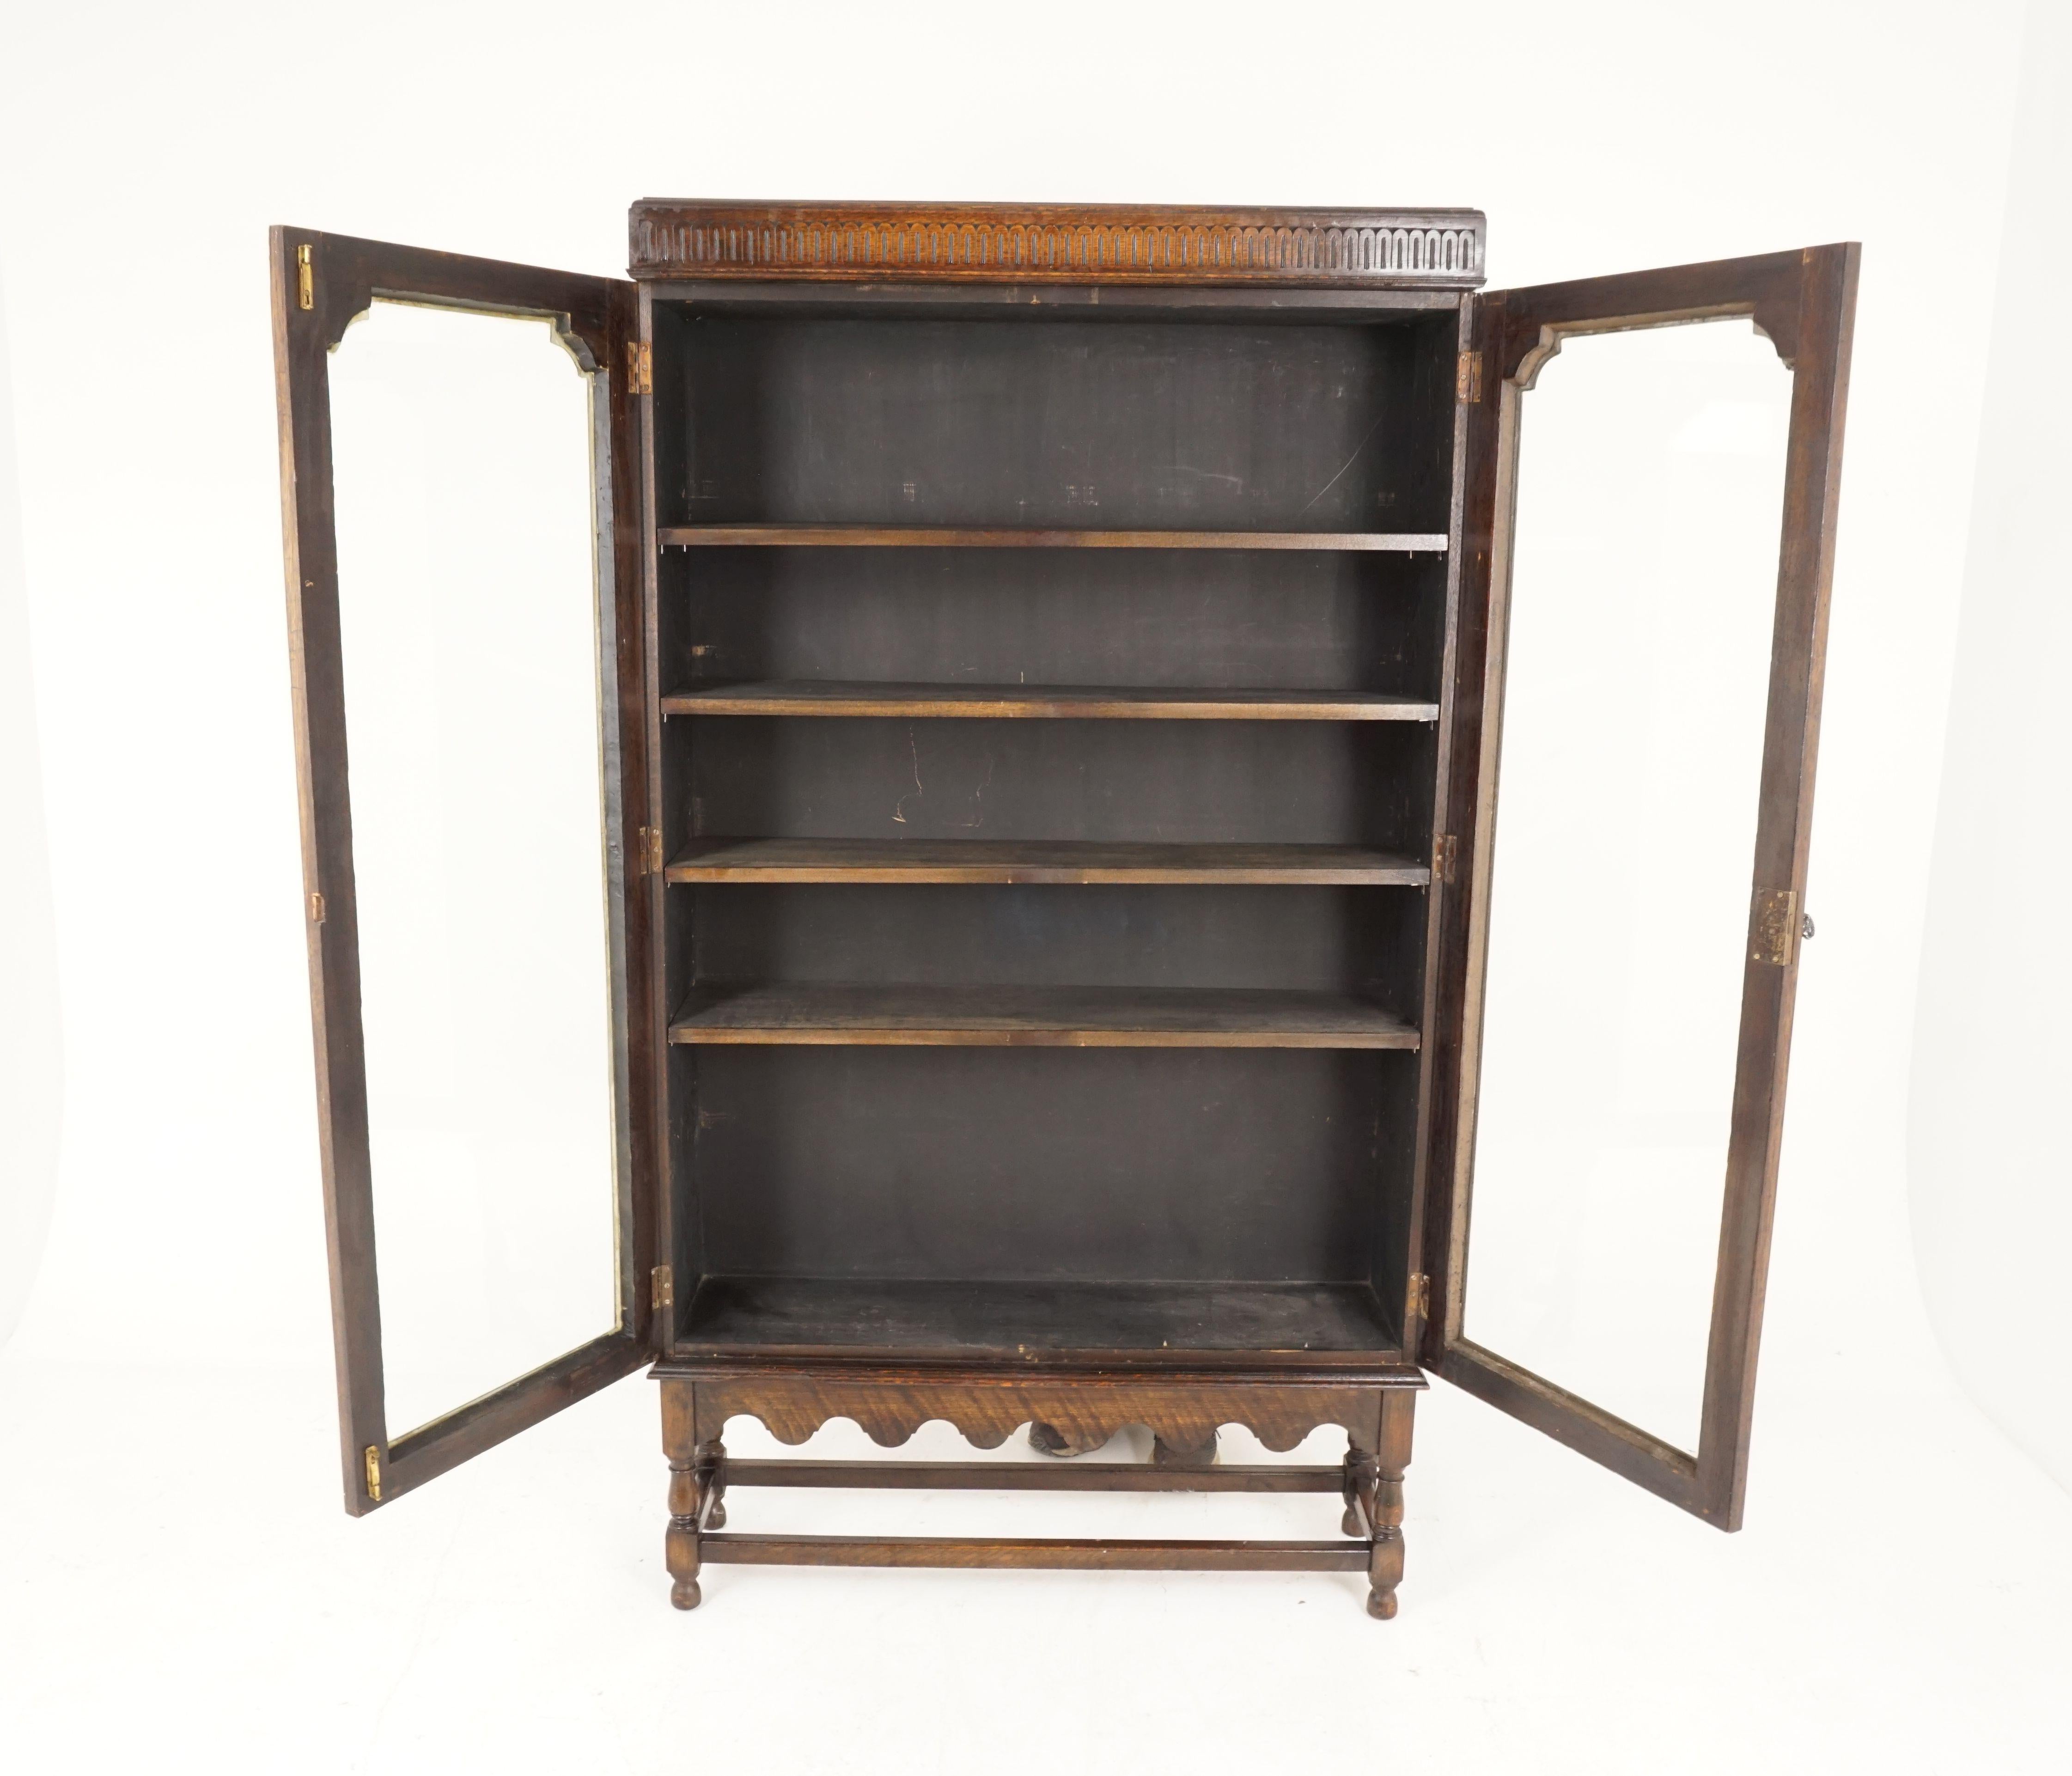 Antique tall oak 2-door cabinet bookcase display cabinet, Scotland 1920, B2220

Scotland 1920
Solid oak
Original finish
Carved cornice on top
Pair of original shaped glass doors
Beading around the doors
Enclosed with four wooden adjustable